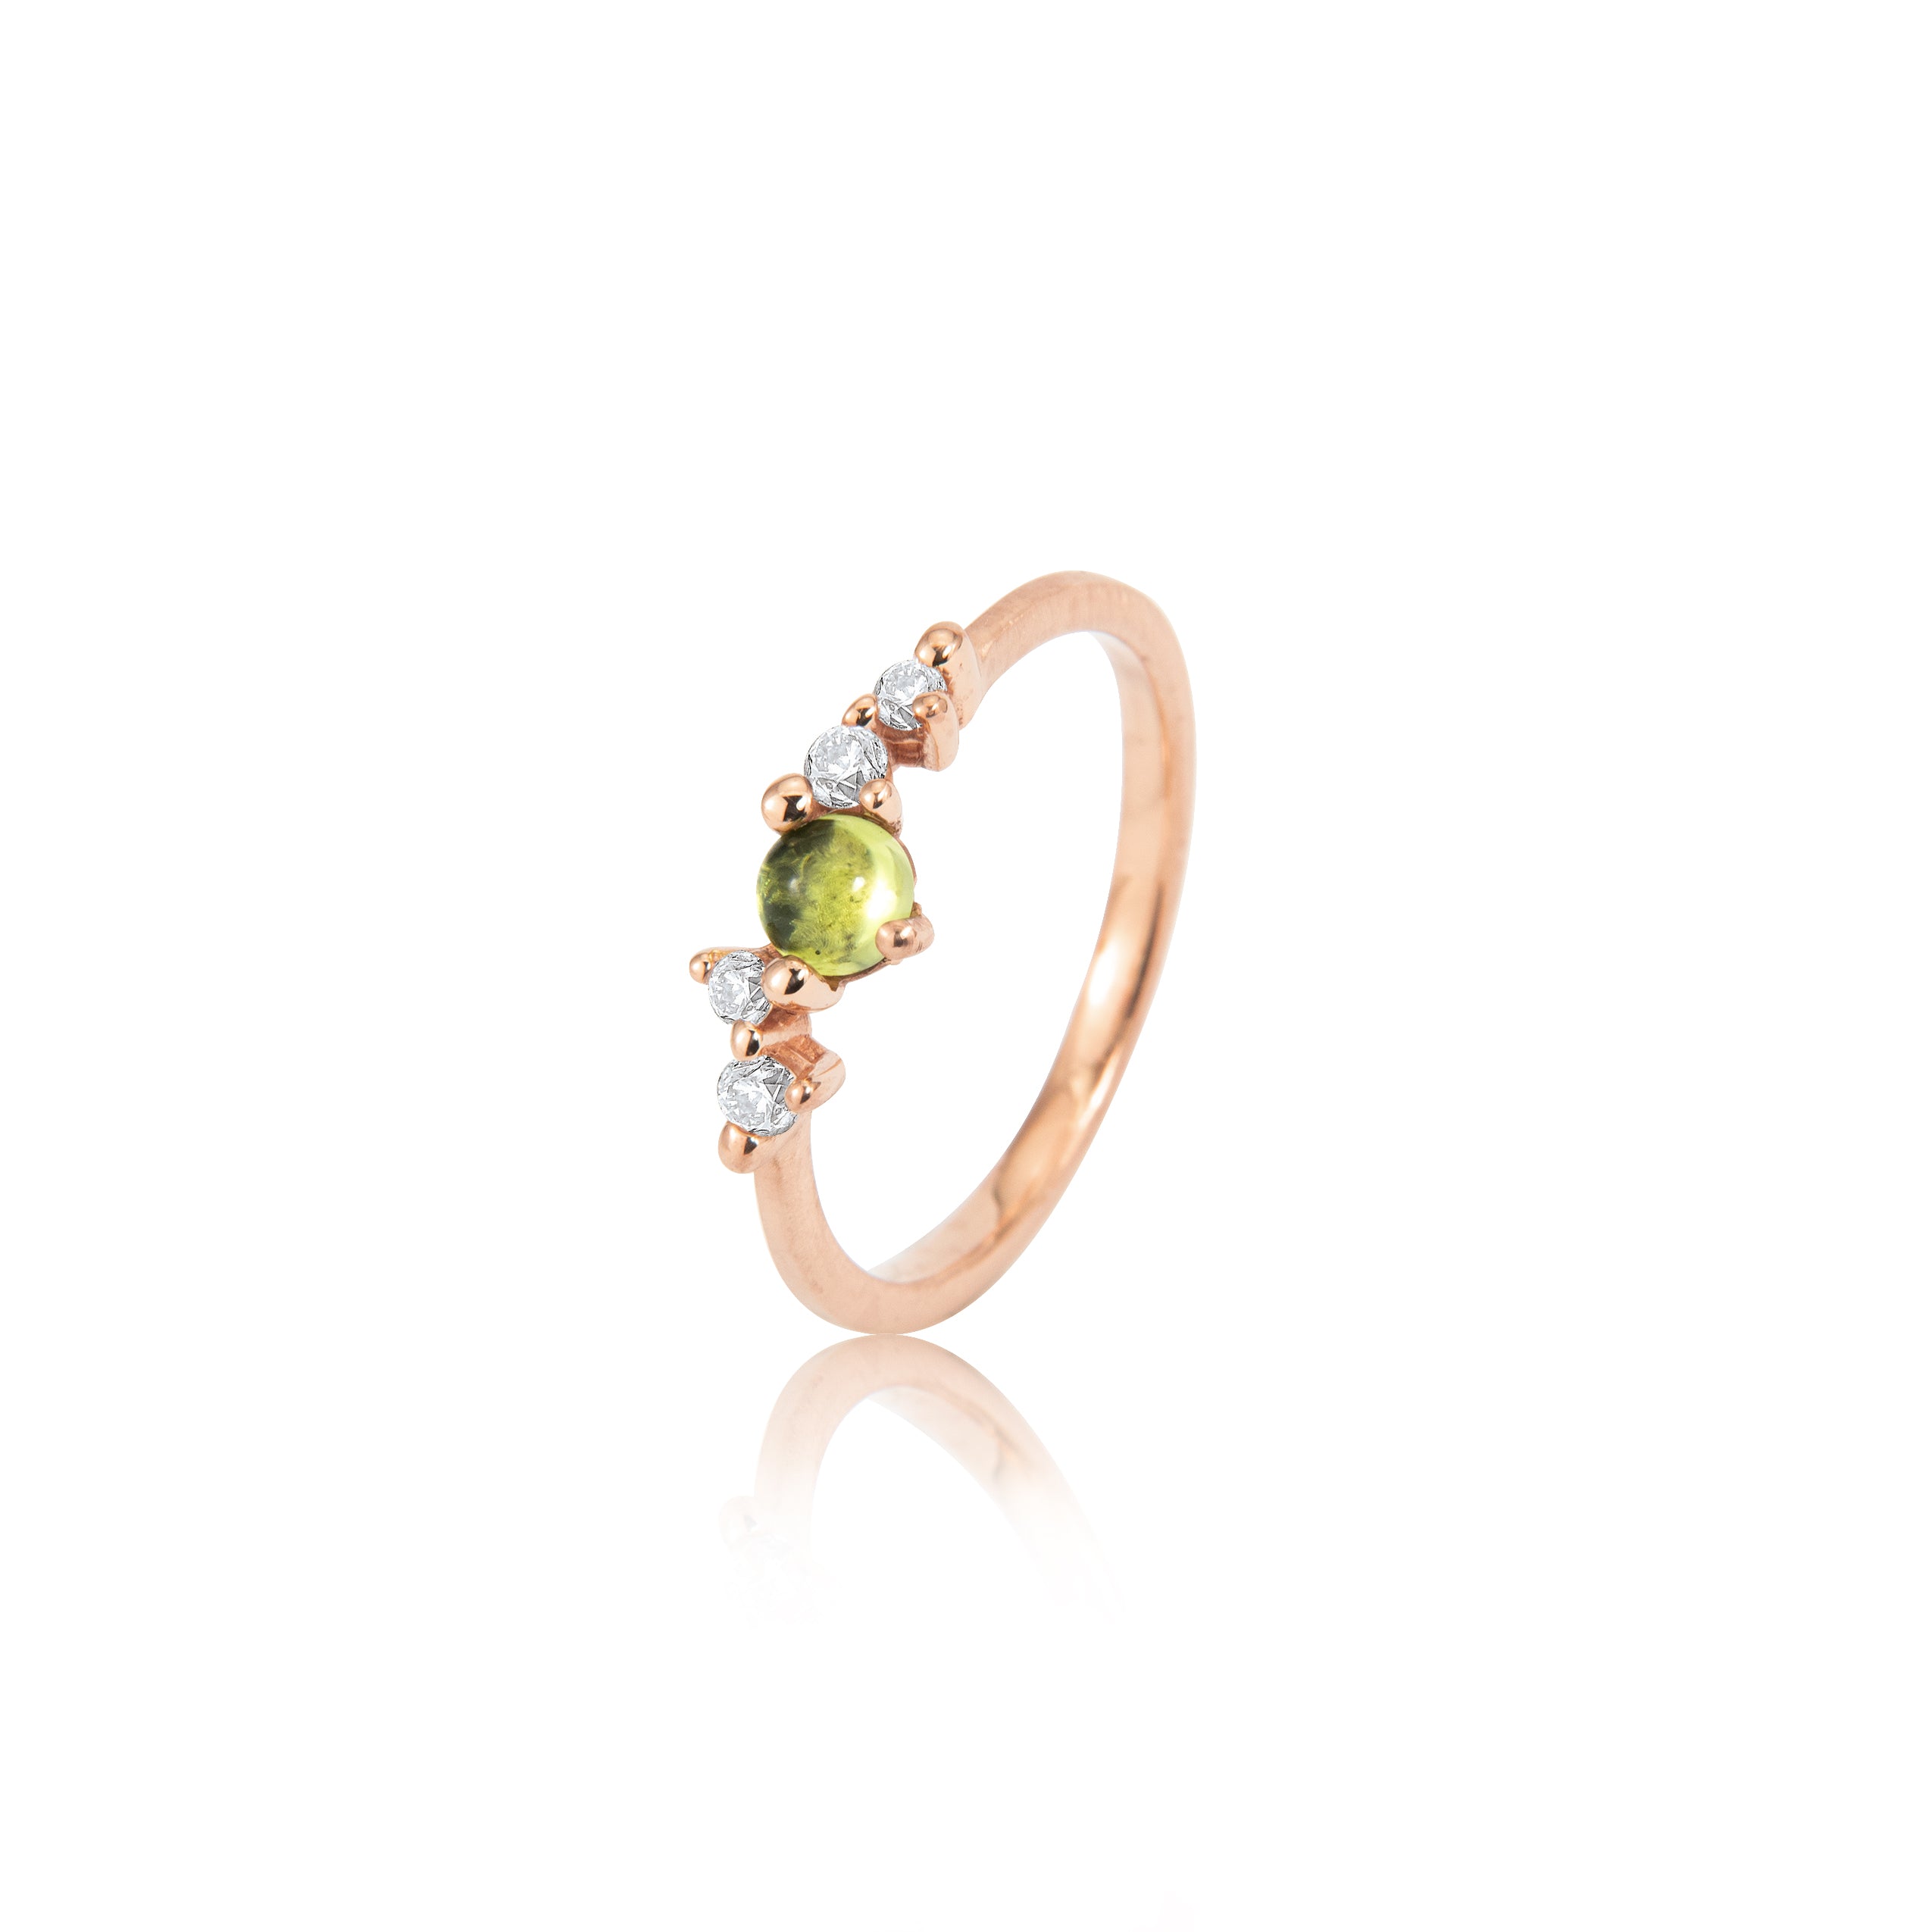 Stellini ring "smal" in 585/- gold with peridot